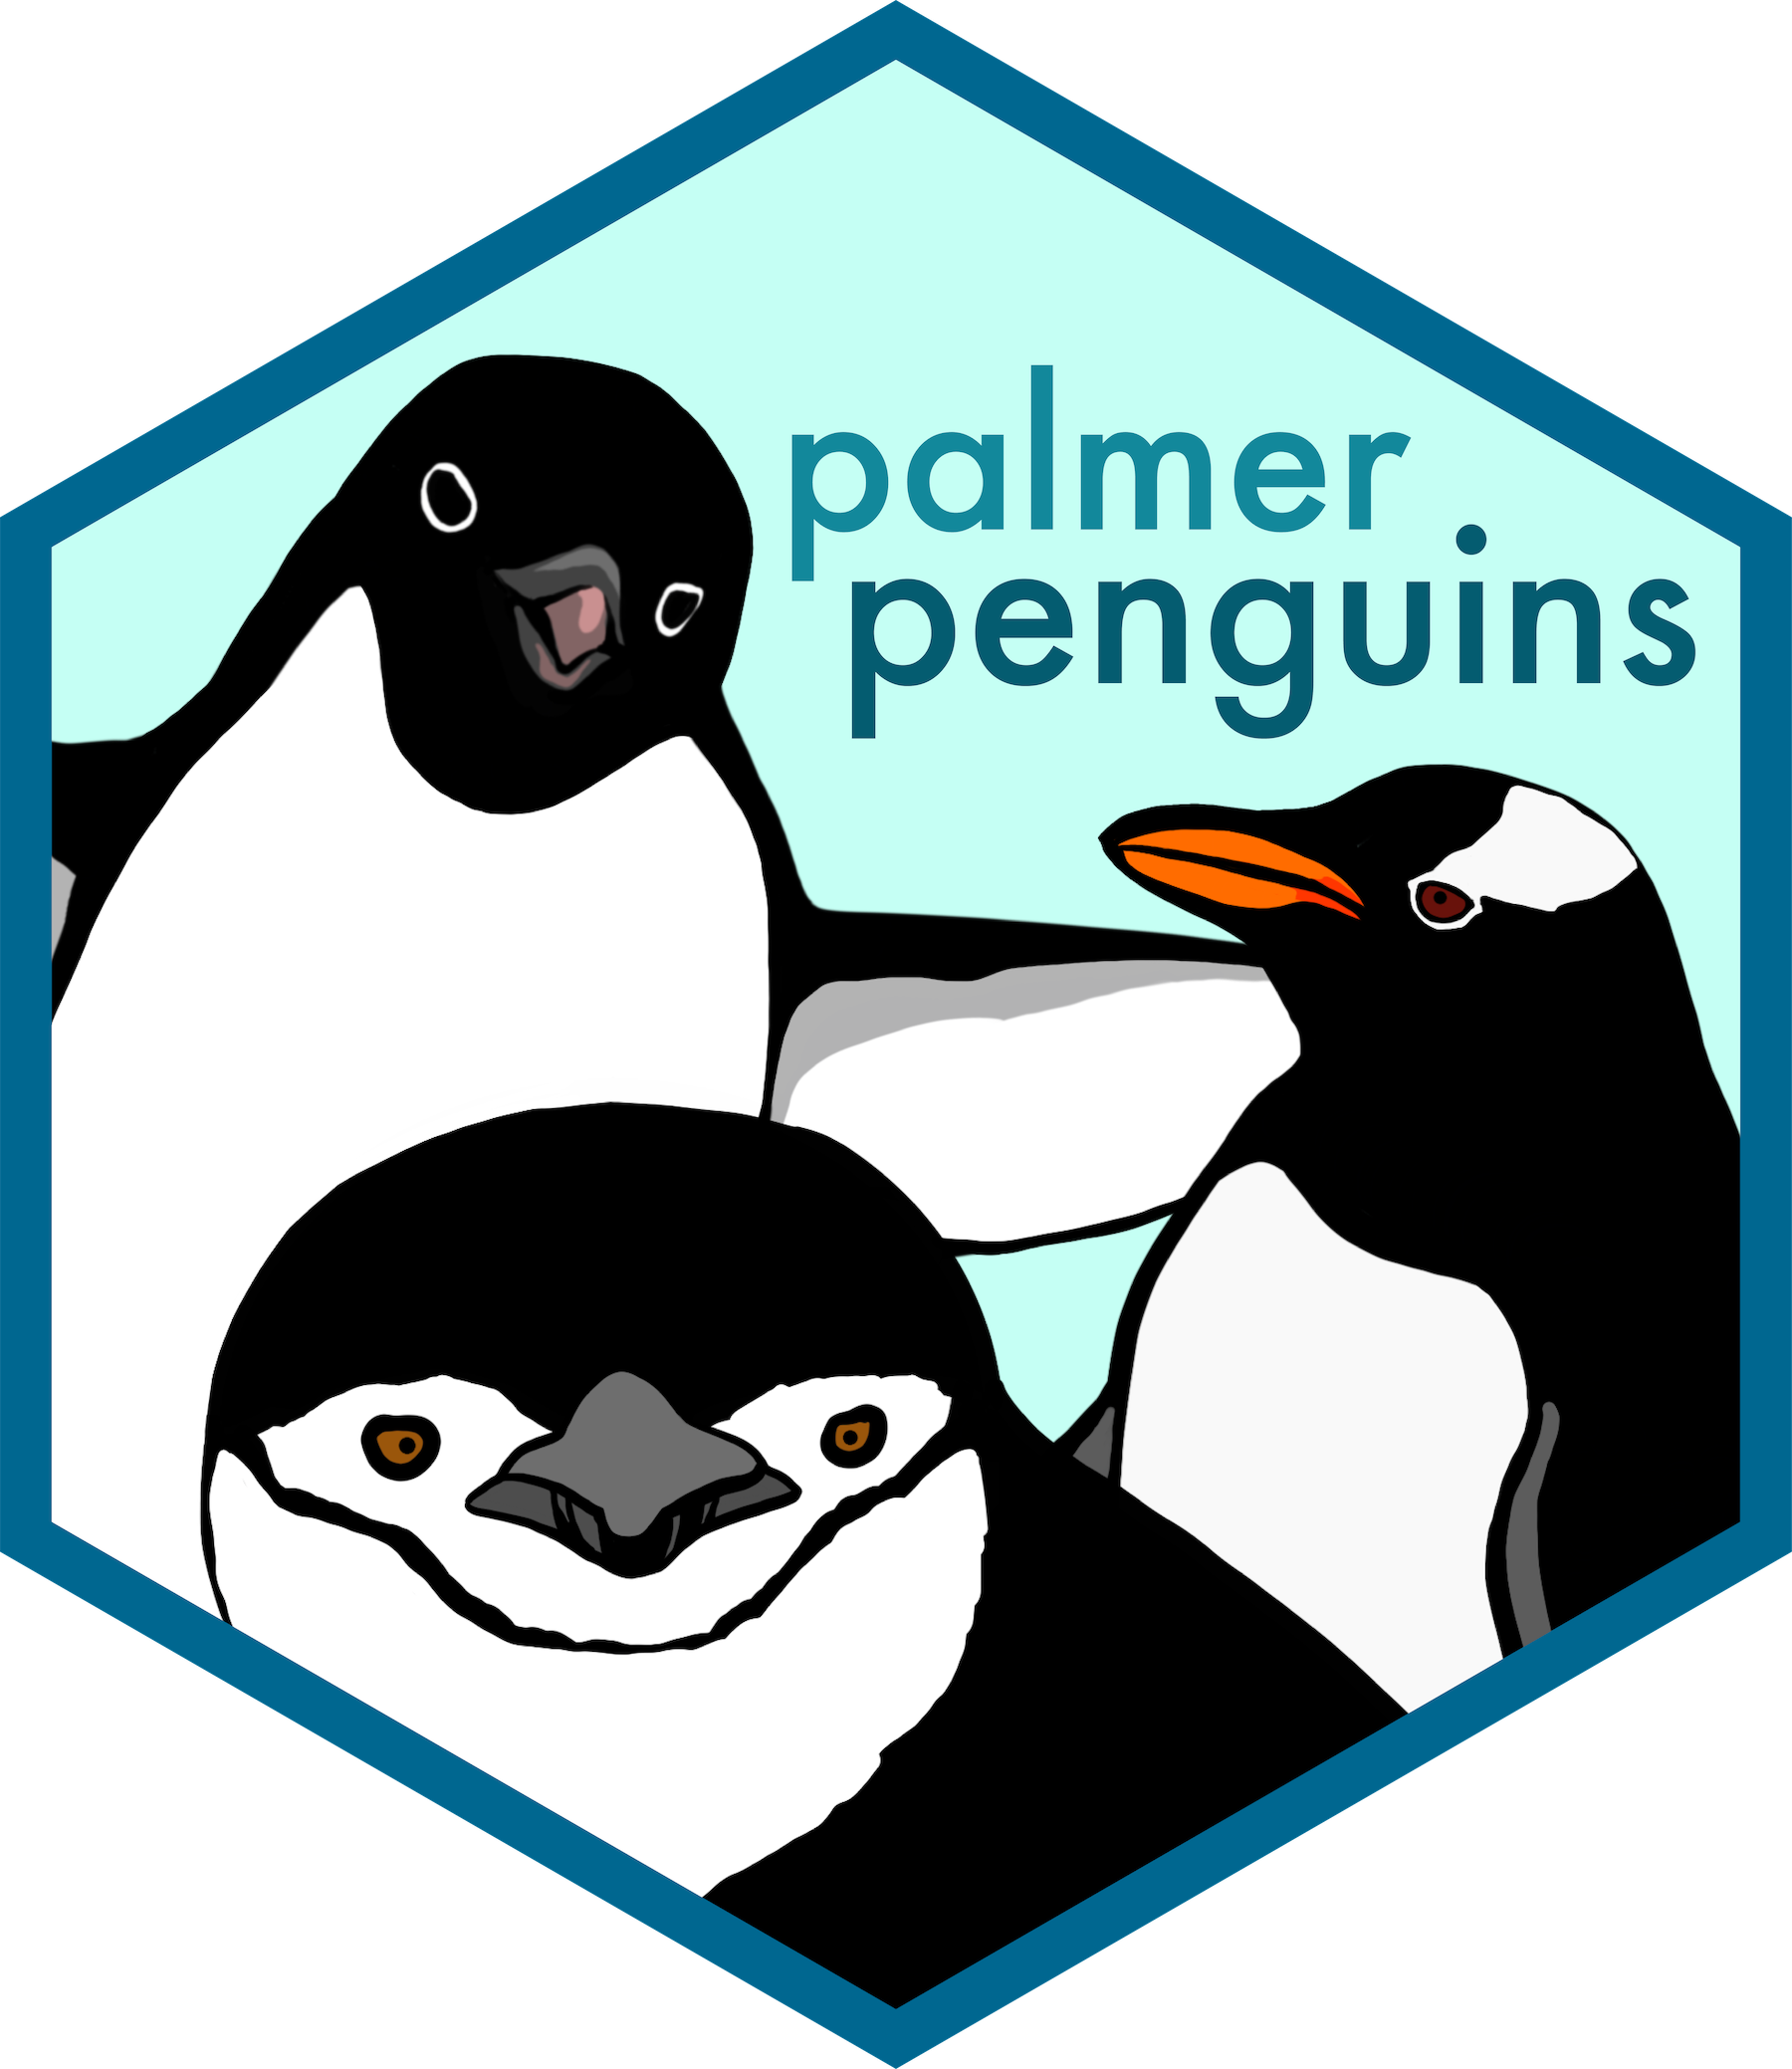 a cute hexagon image of three penguins as a part of the palmer penguins package